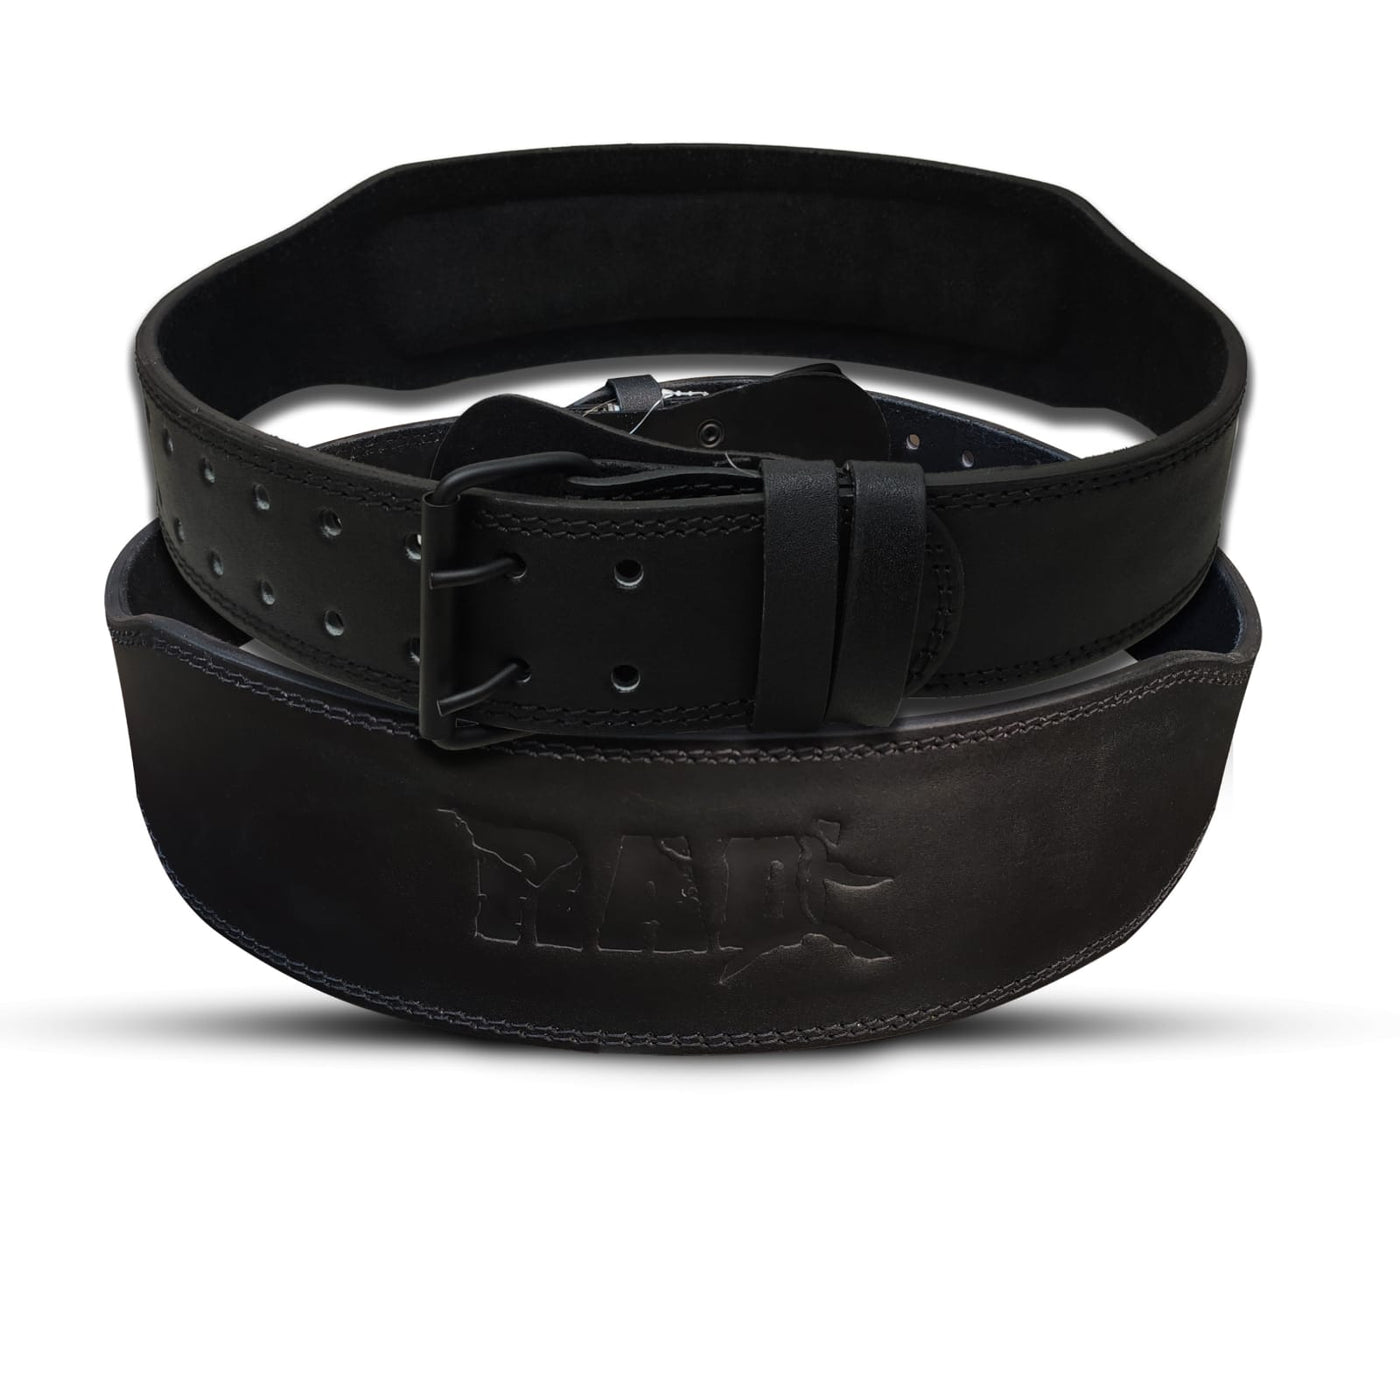 RAD Double Prong Buckle Weight Lifting Belt